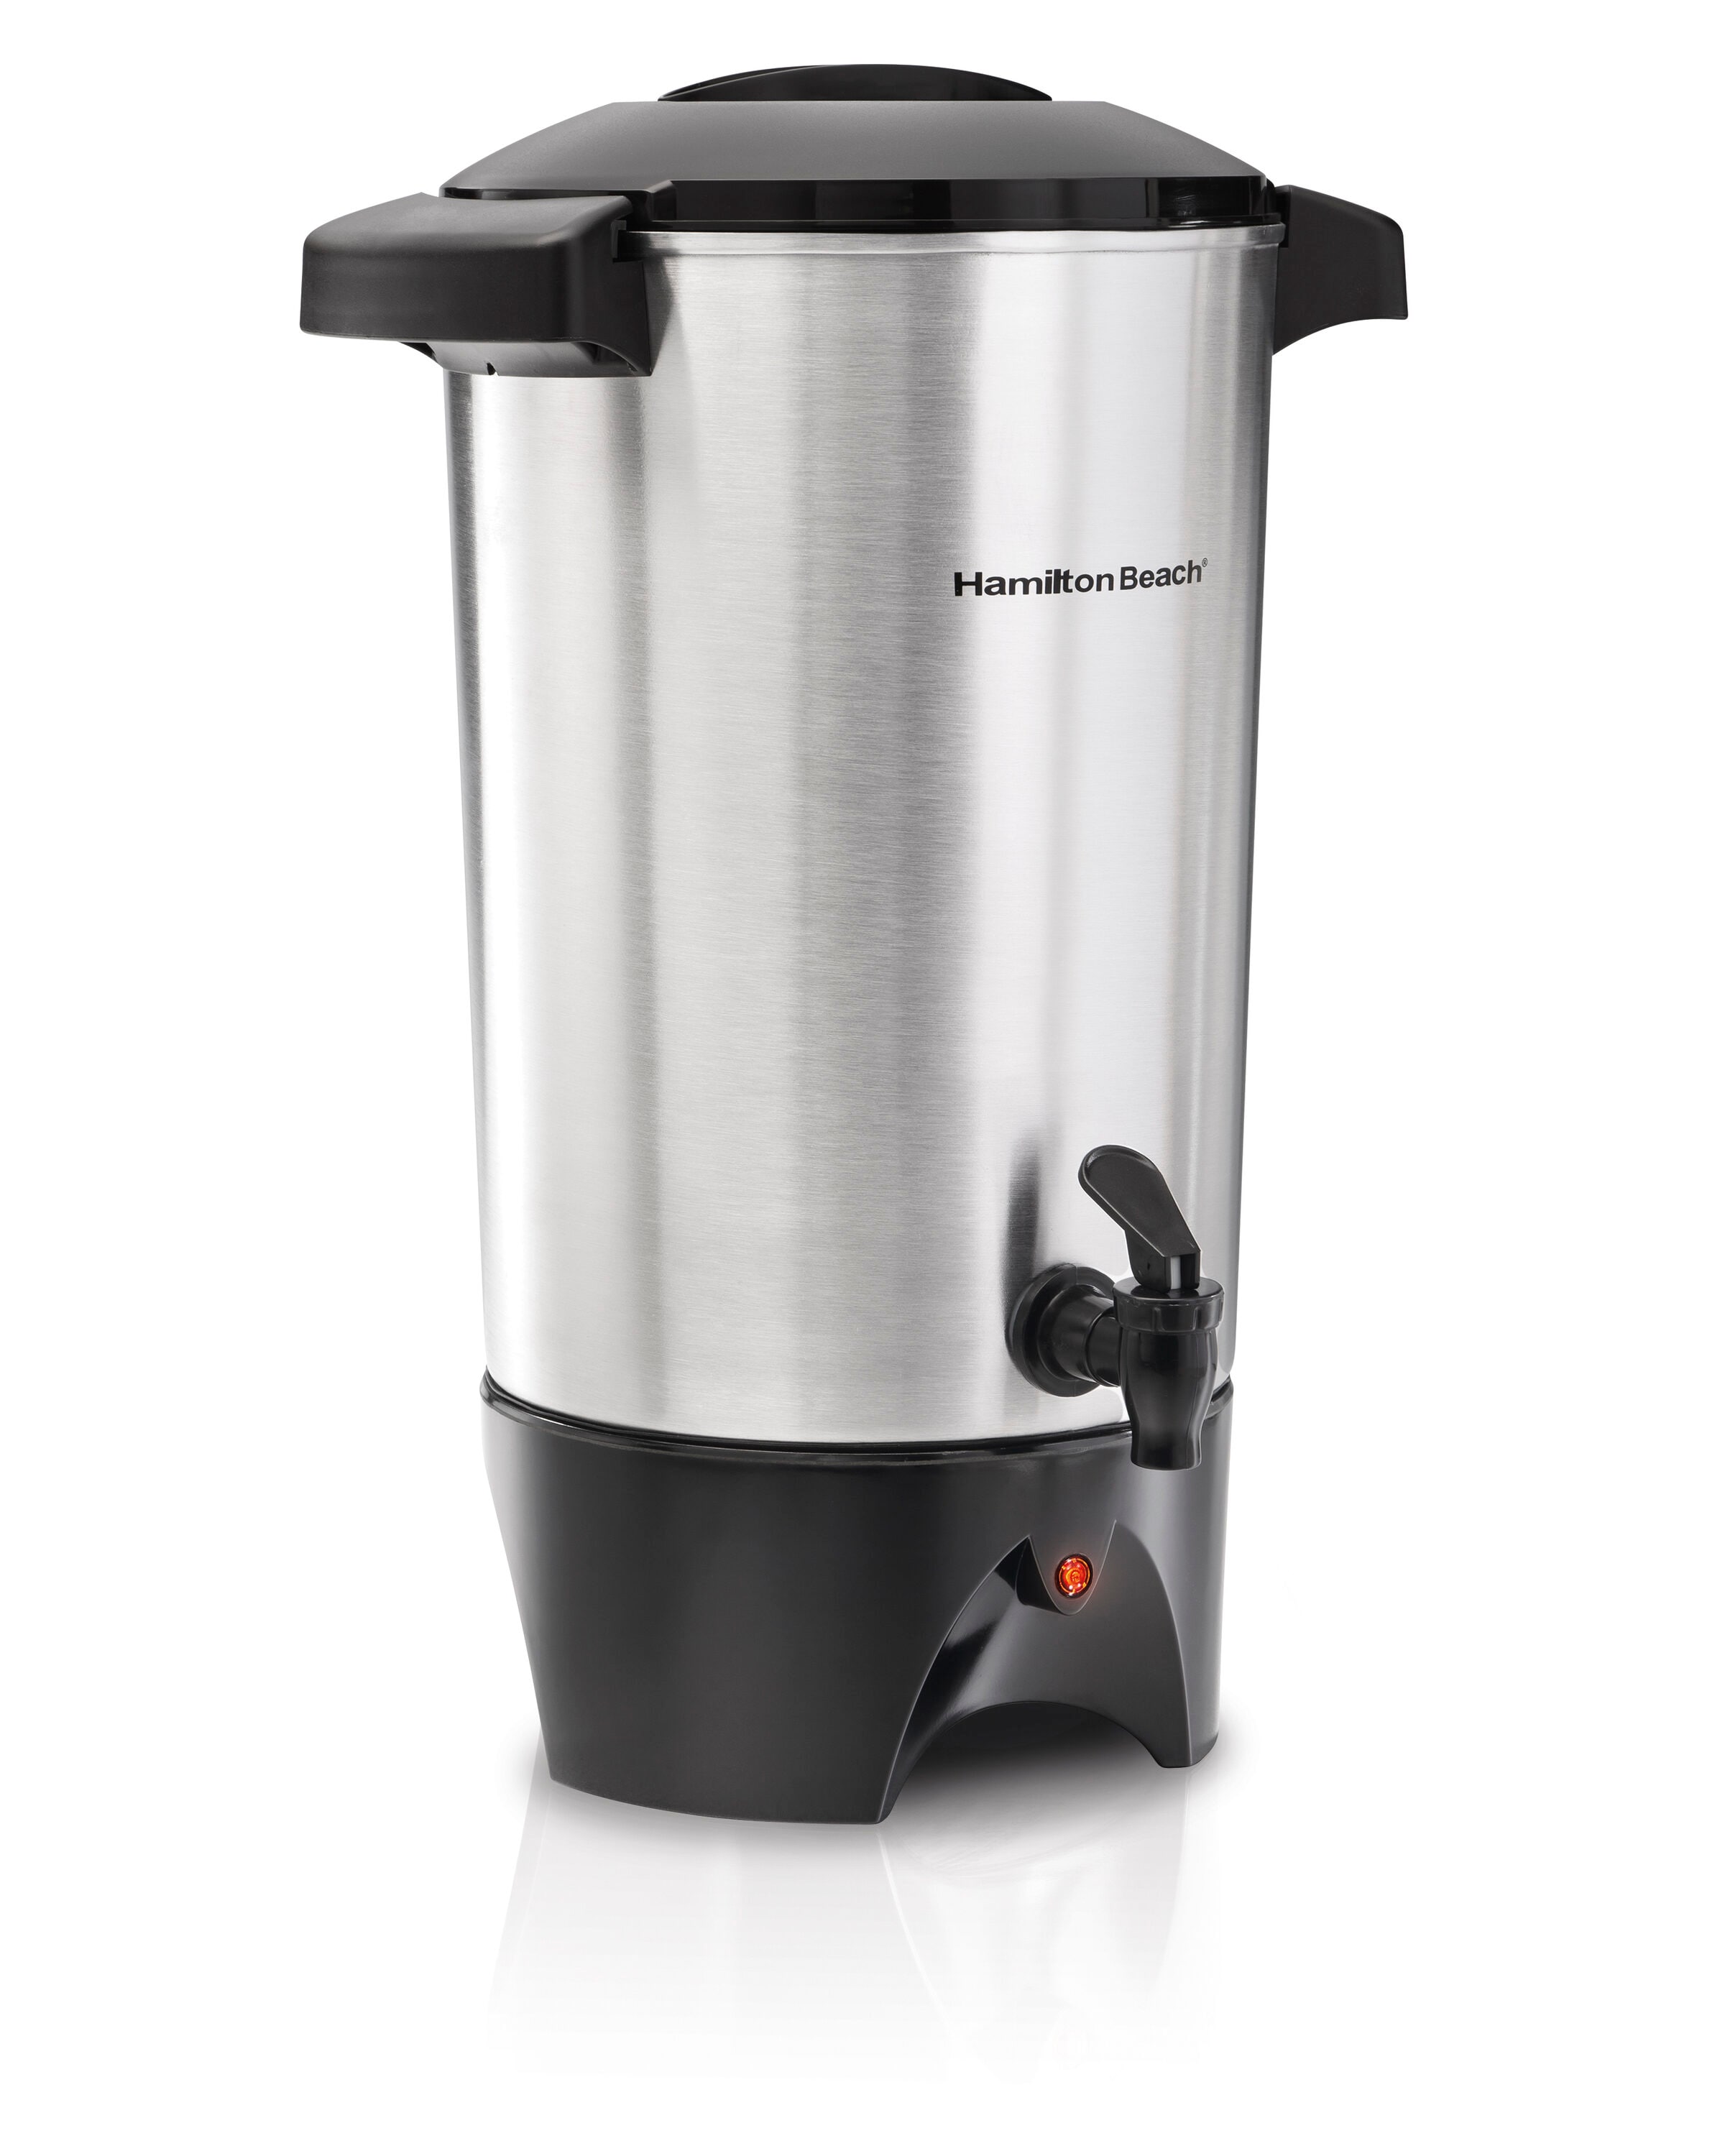 West Bend 12 Cup Hot & Iced Coffee Maker, in Stainless Steel (CMWB12BK13)